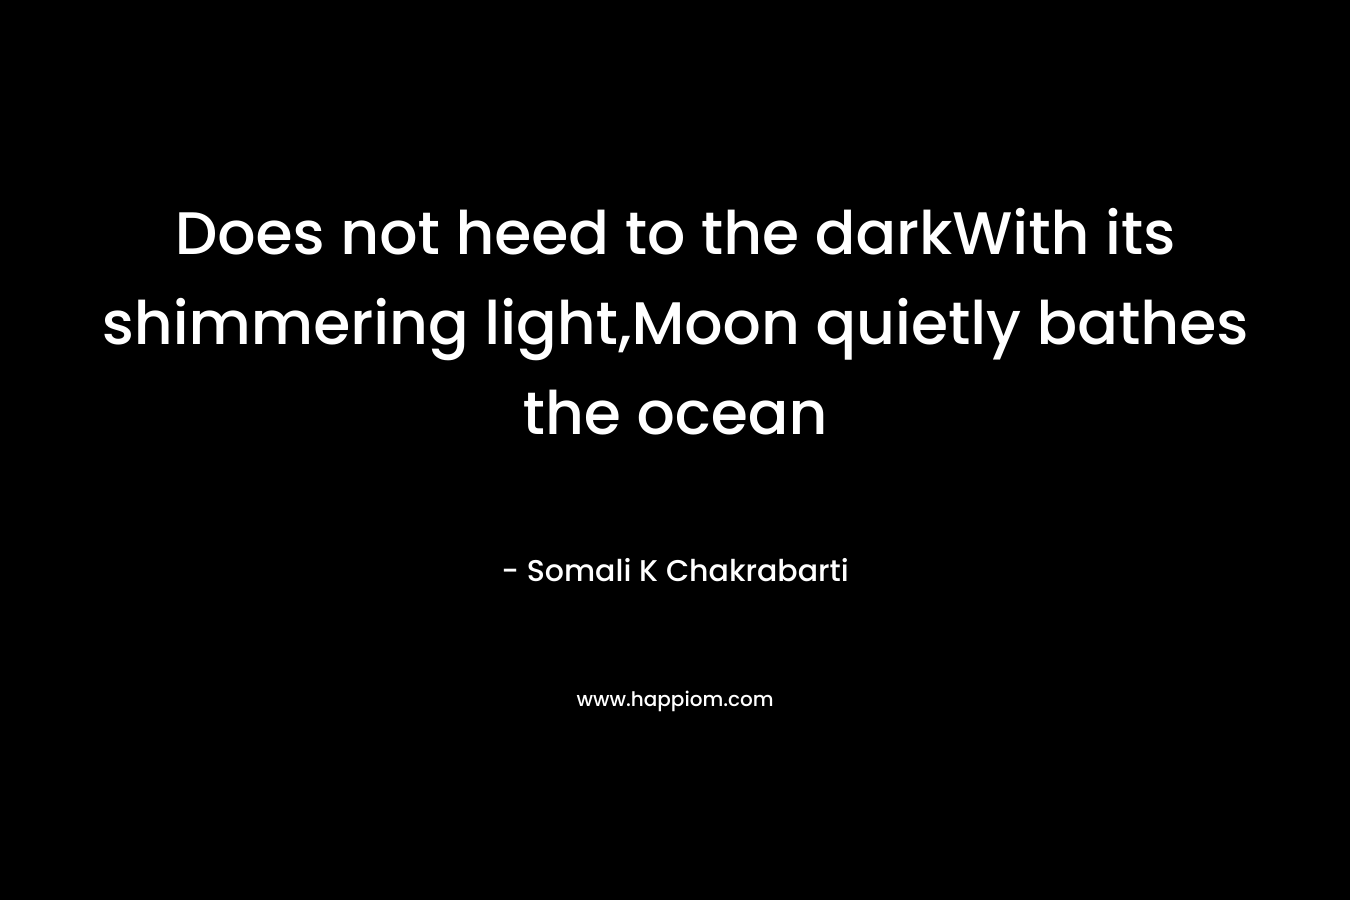 Does not heed to the darkWith its shimmering light,Moon quietly bathes the ocean – Somali K Chakrabarti